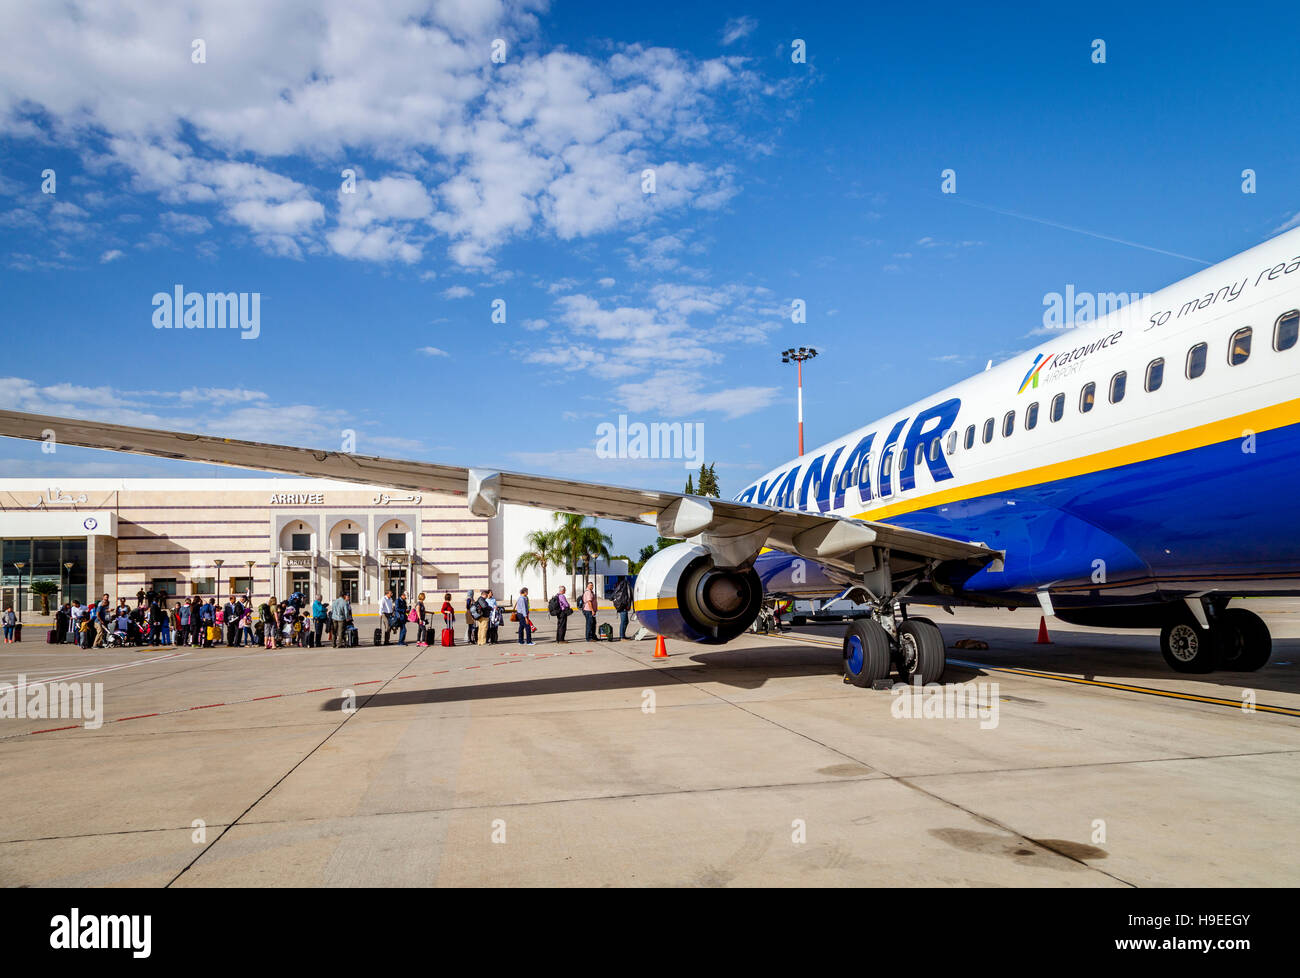 Passengers Boarding A Ryan Air Flight At Fez Airport, Fez, Morocco Stock Photo